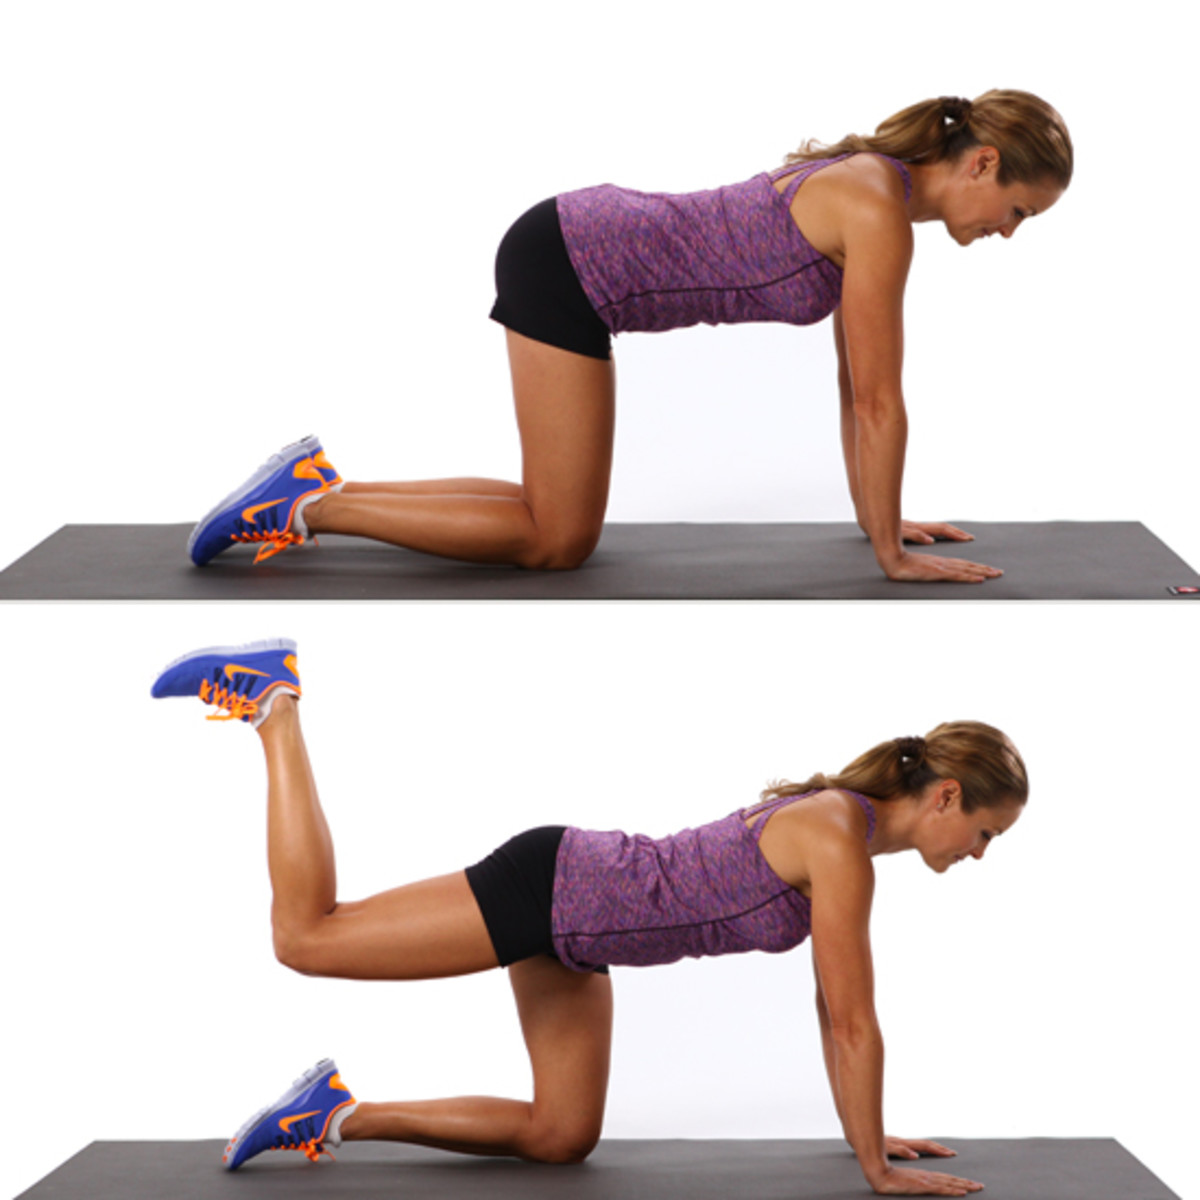 Donkey kicks are one of the most popular glute exercises. 